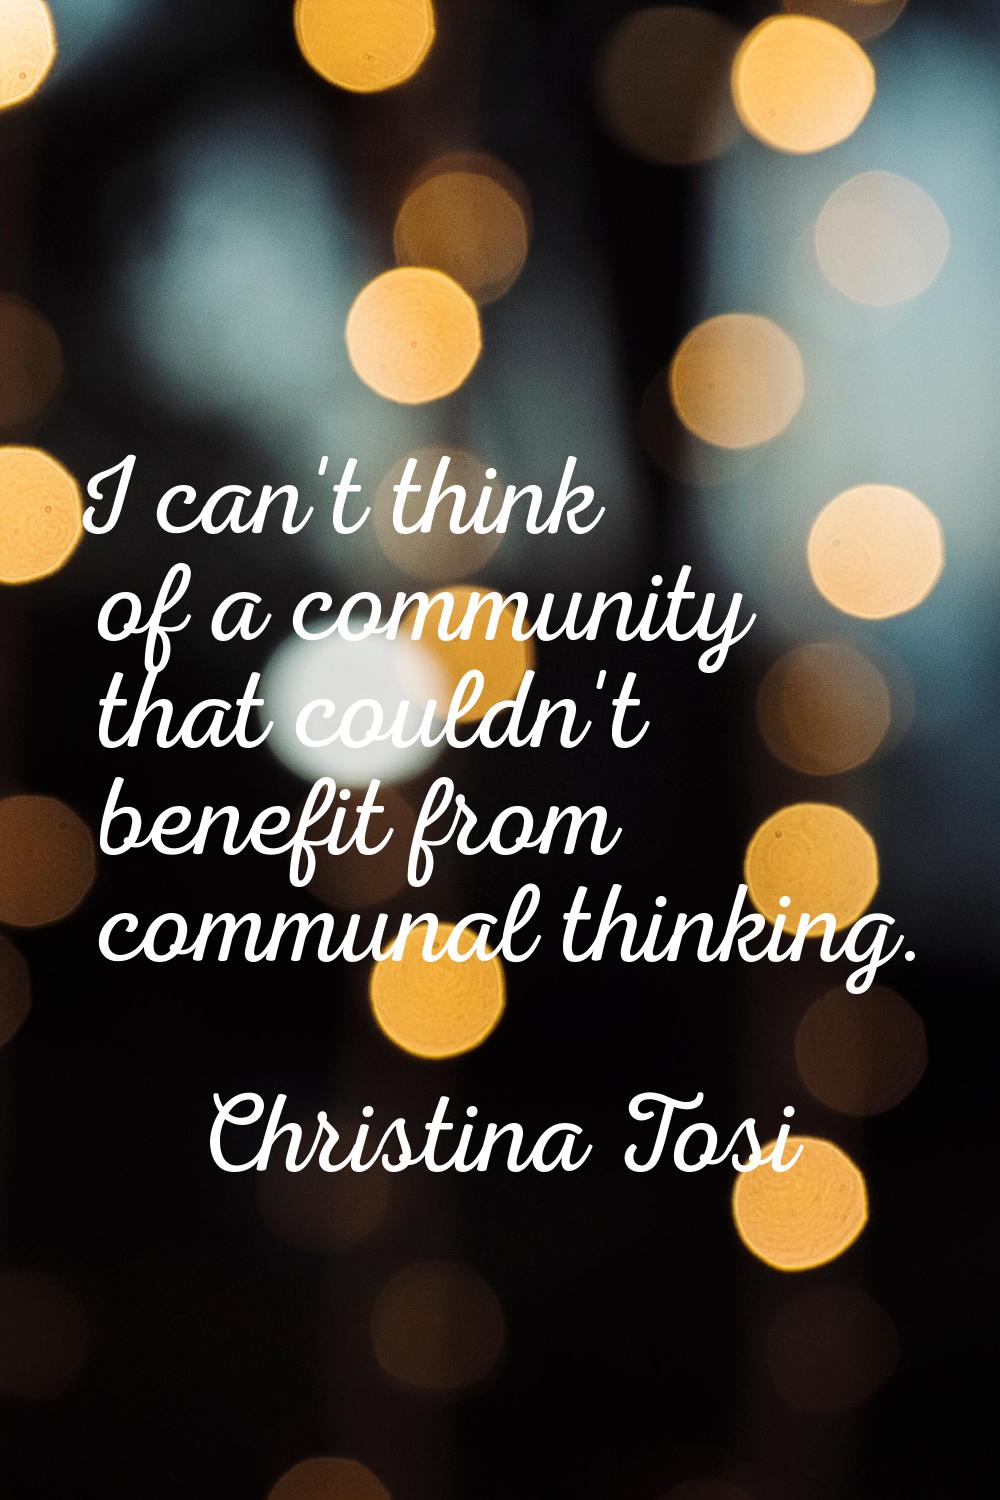 I can't think of a community that couldn't benefit from communal thinking.